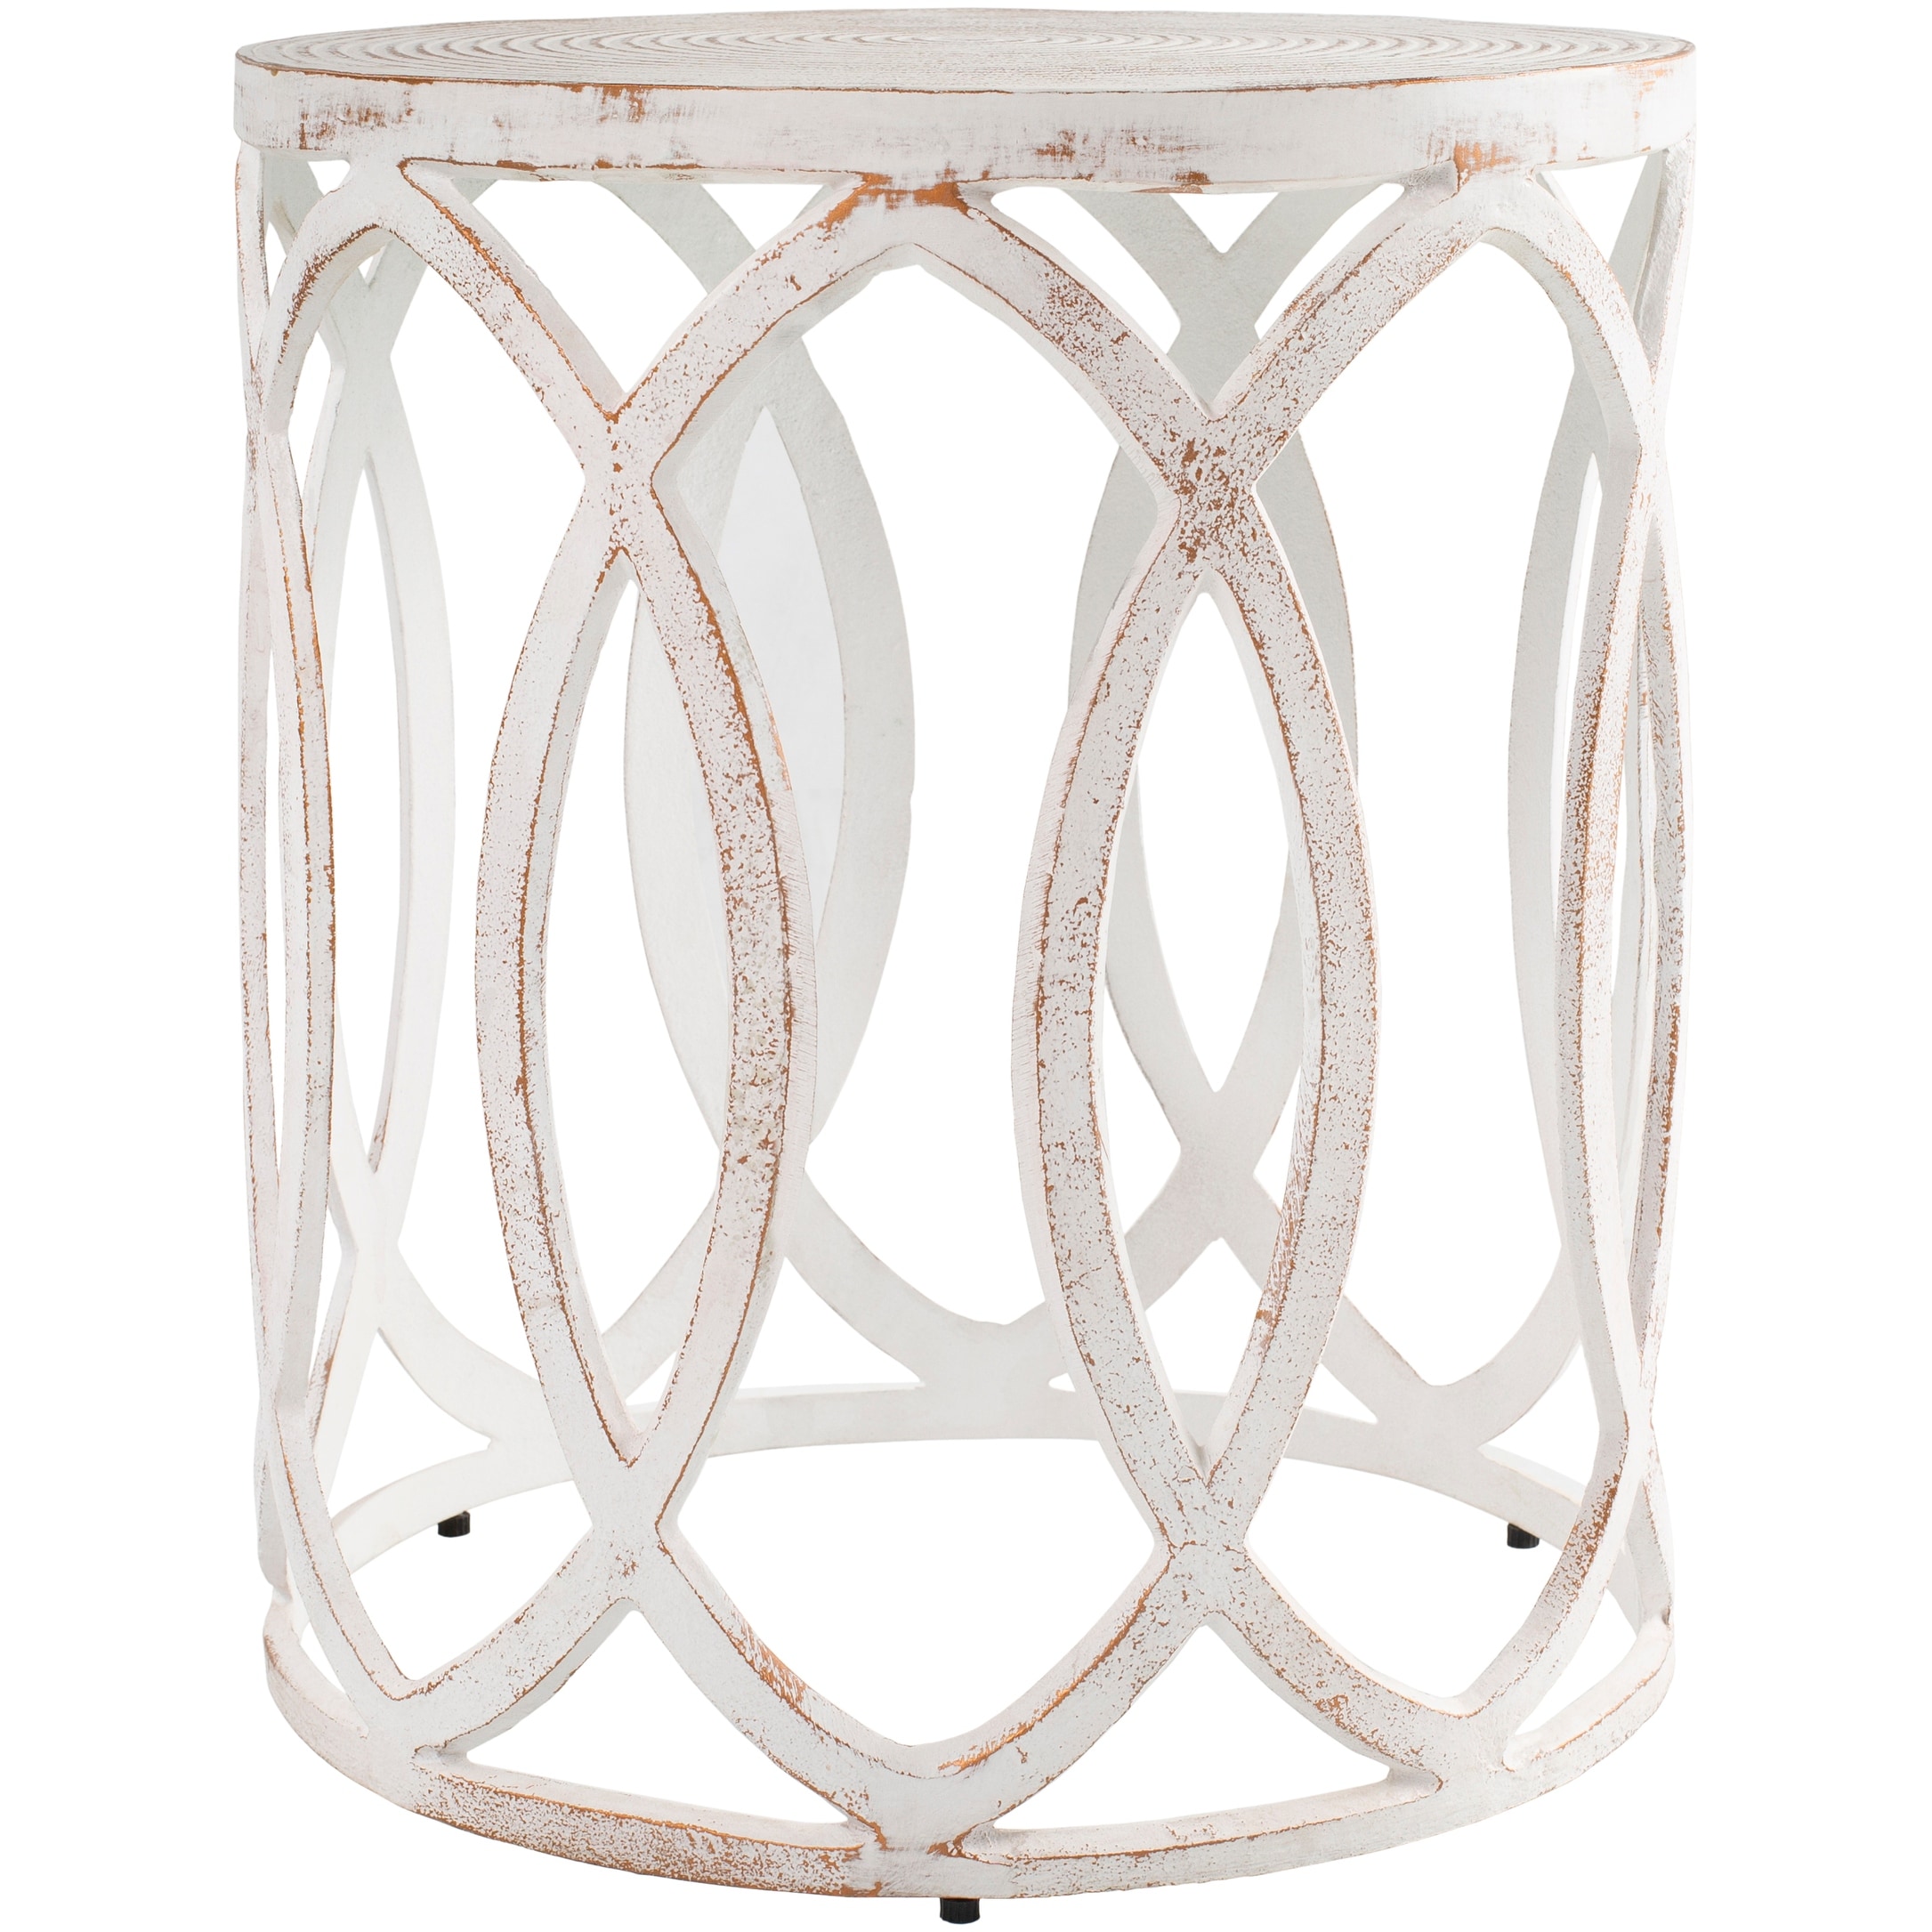 W8160 Valley Modern Floral Lace Cut Iron Drum Shaped Accent Table Auction